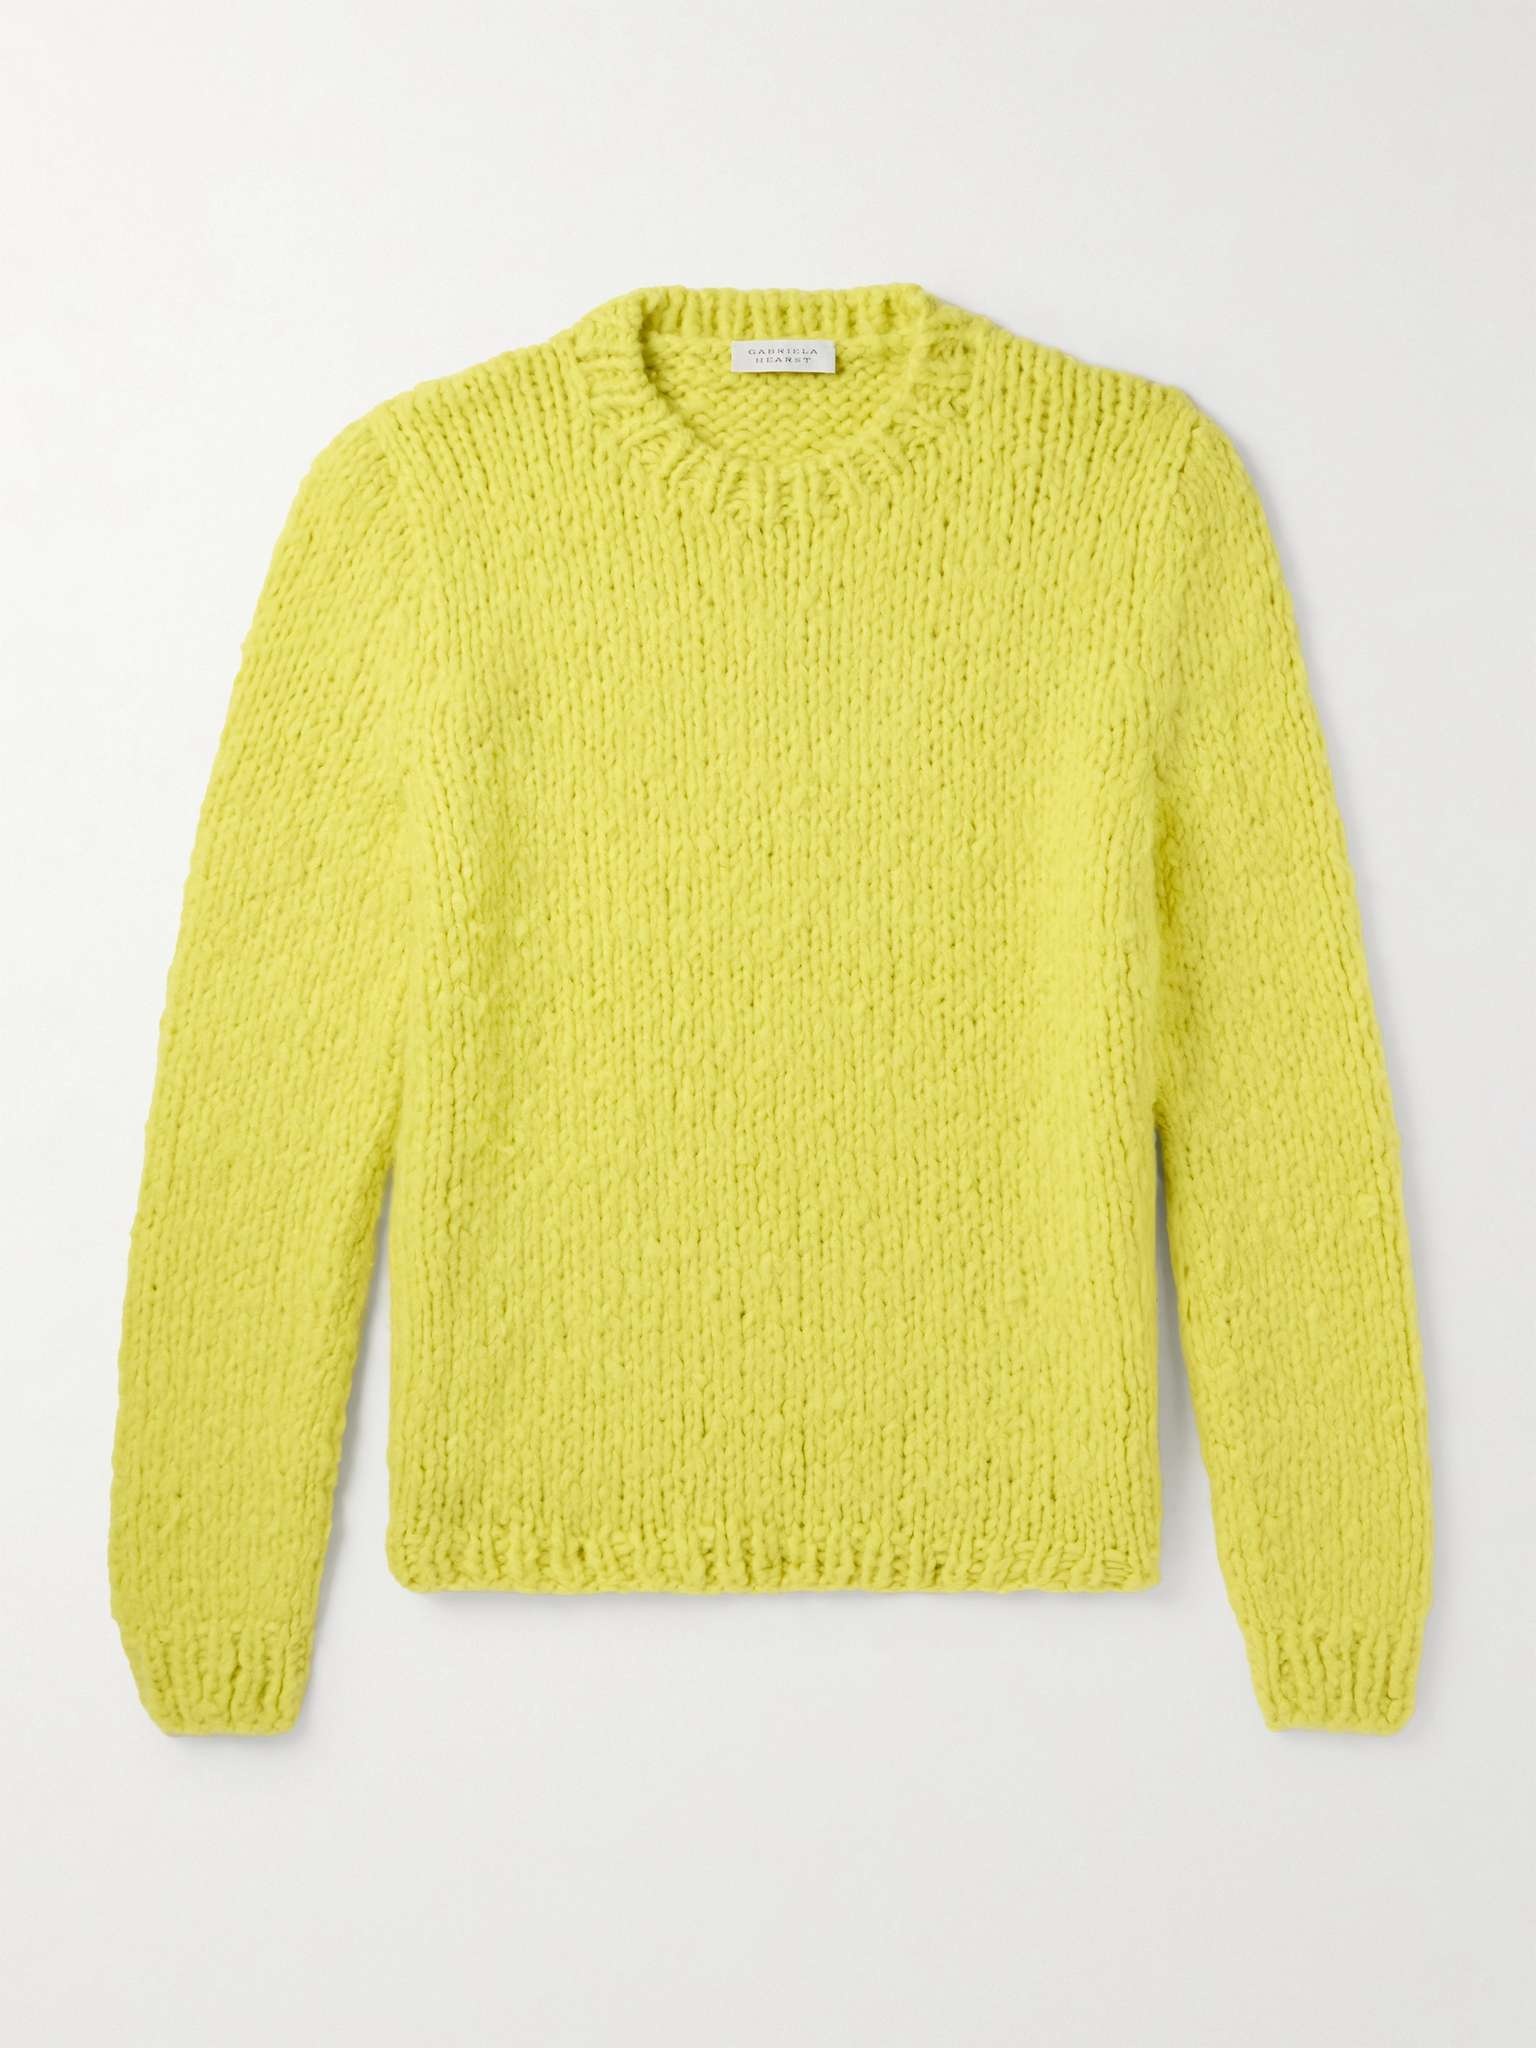 Lawrence Brushed Cashmere Sweater - 1